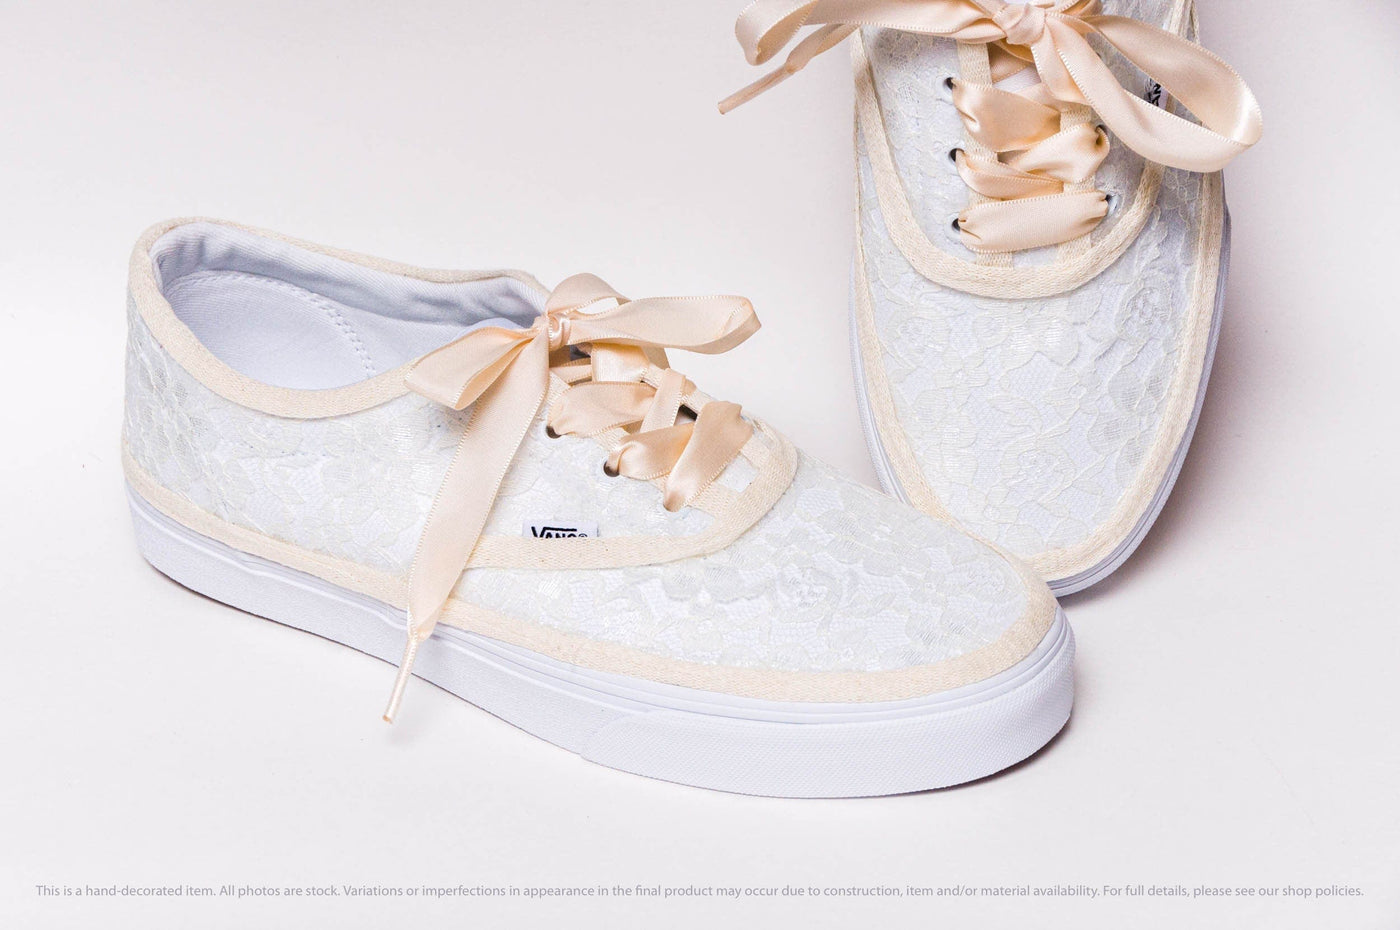 Ivory Lace Over White Sneakers With Platform And Slip On Options 5 / Era